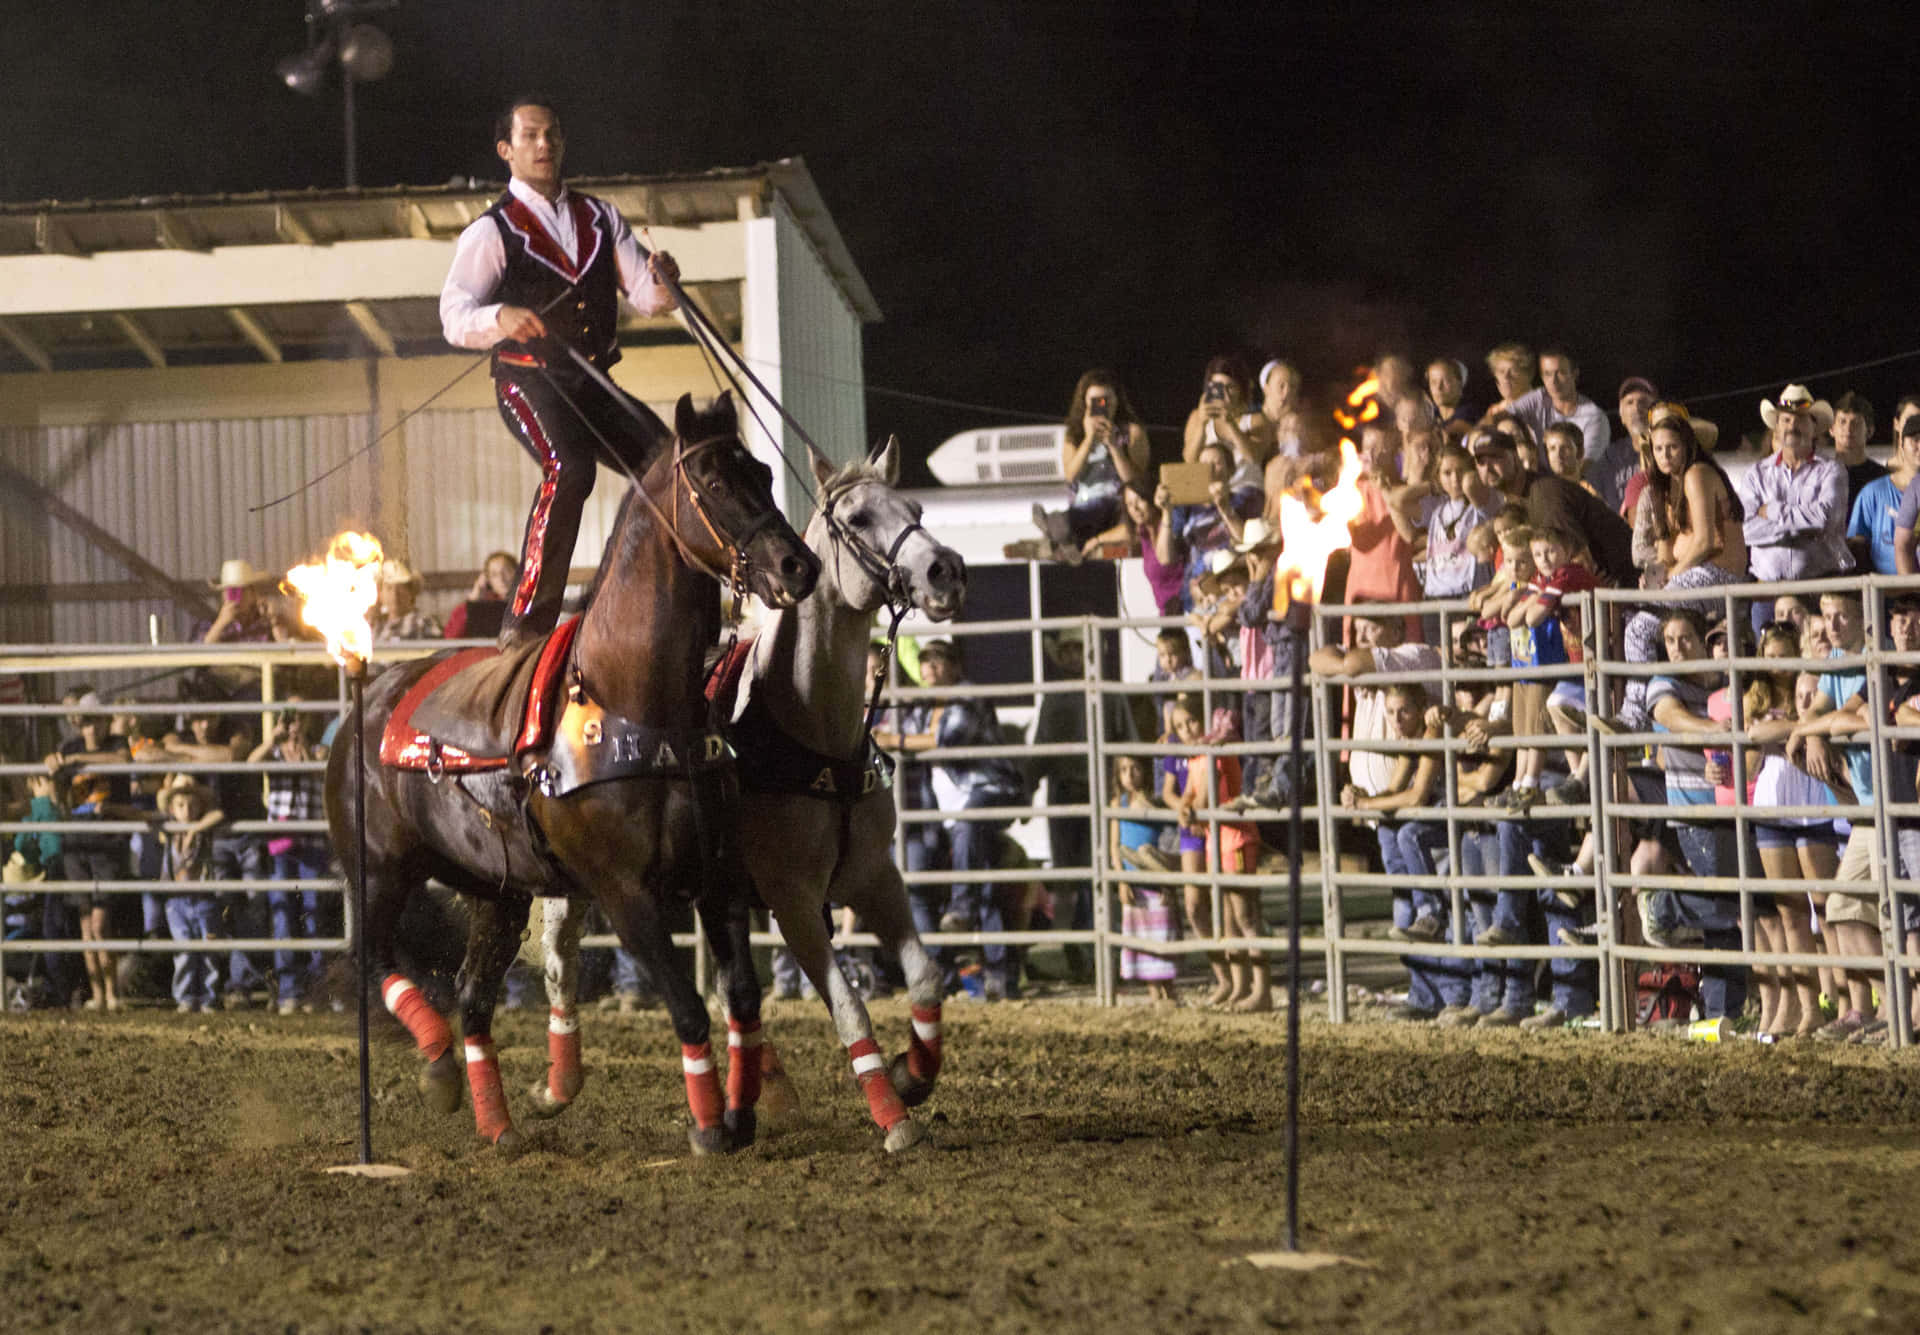 Rodeo action in full swing: Cowboy on a wild horse